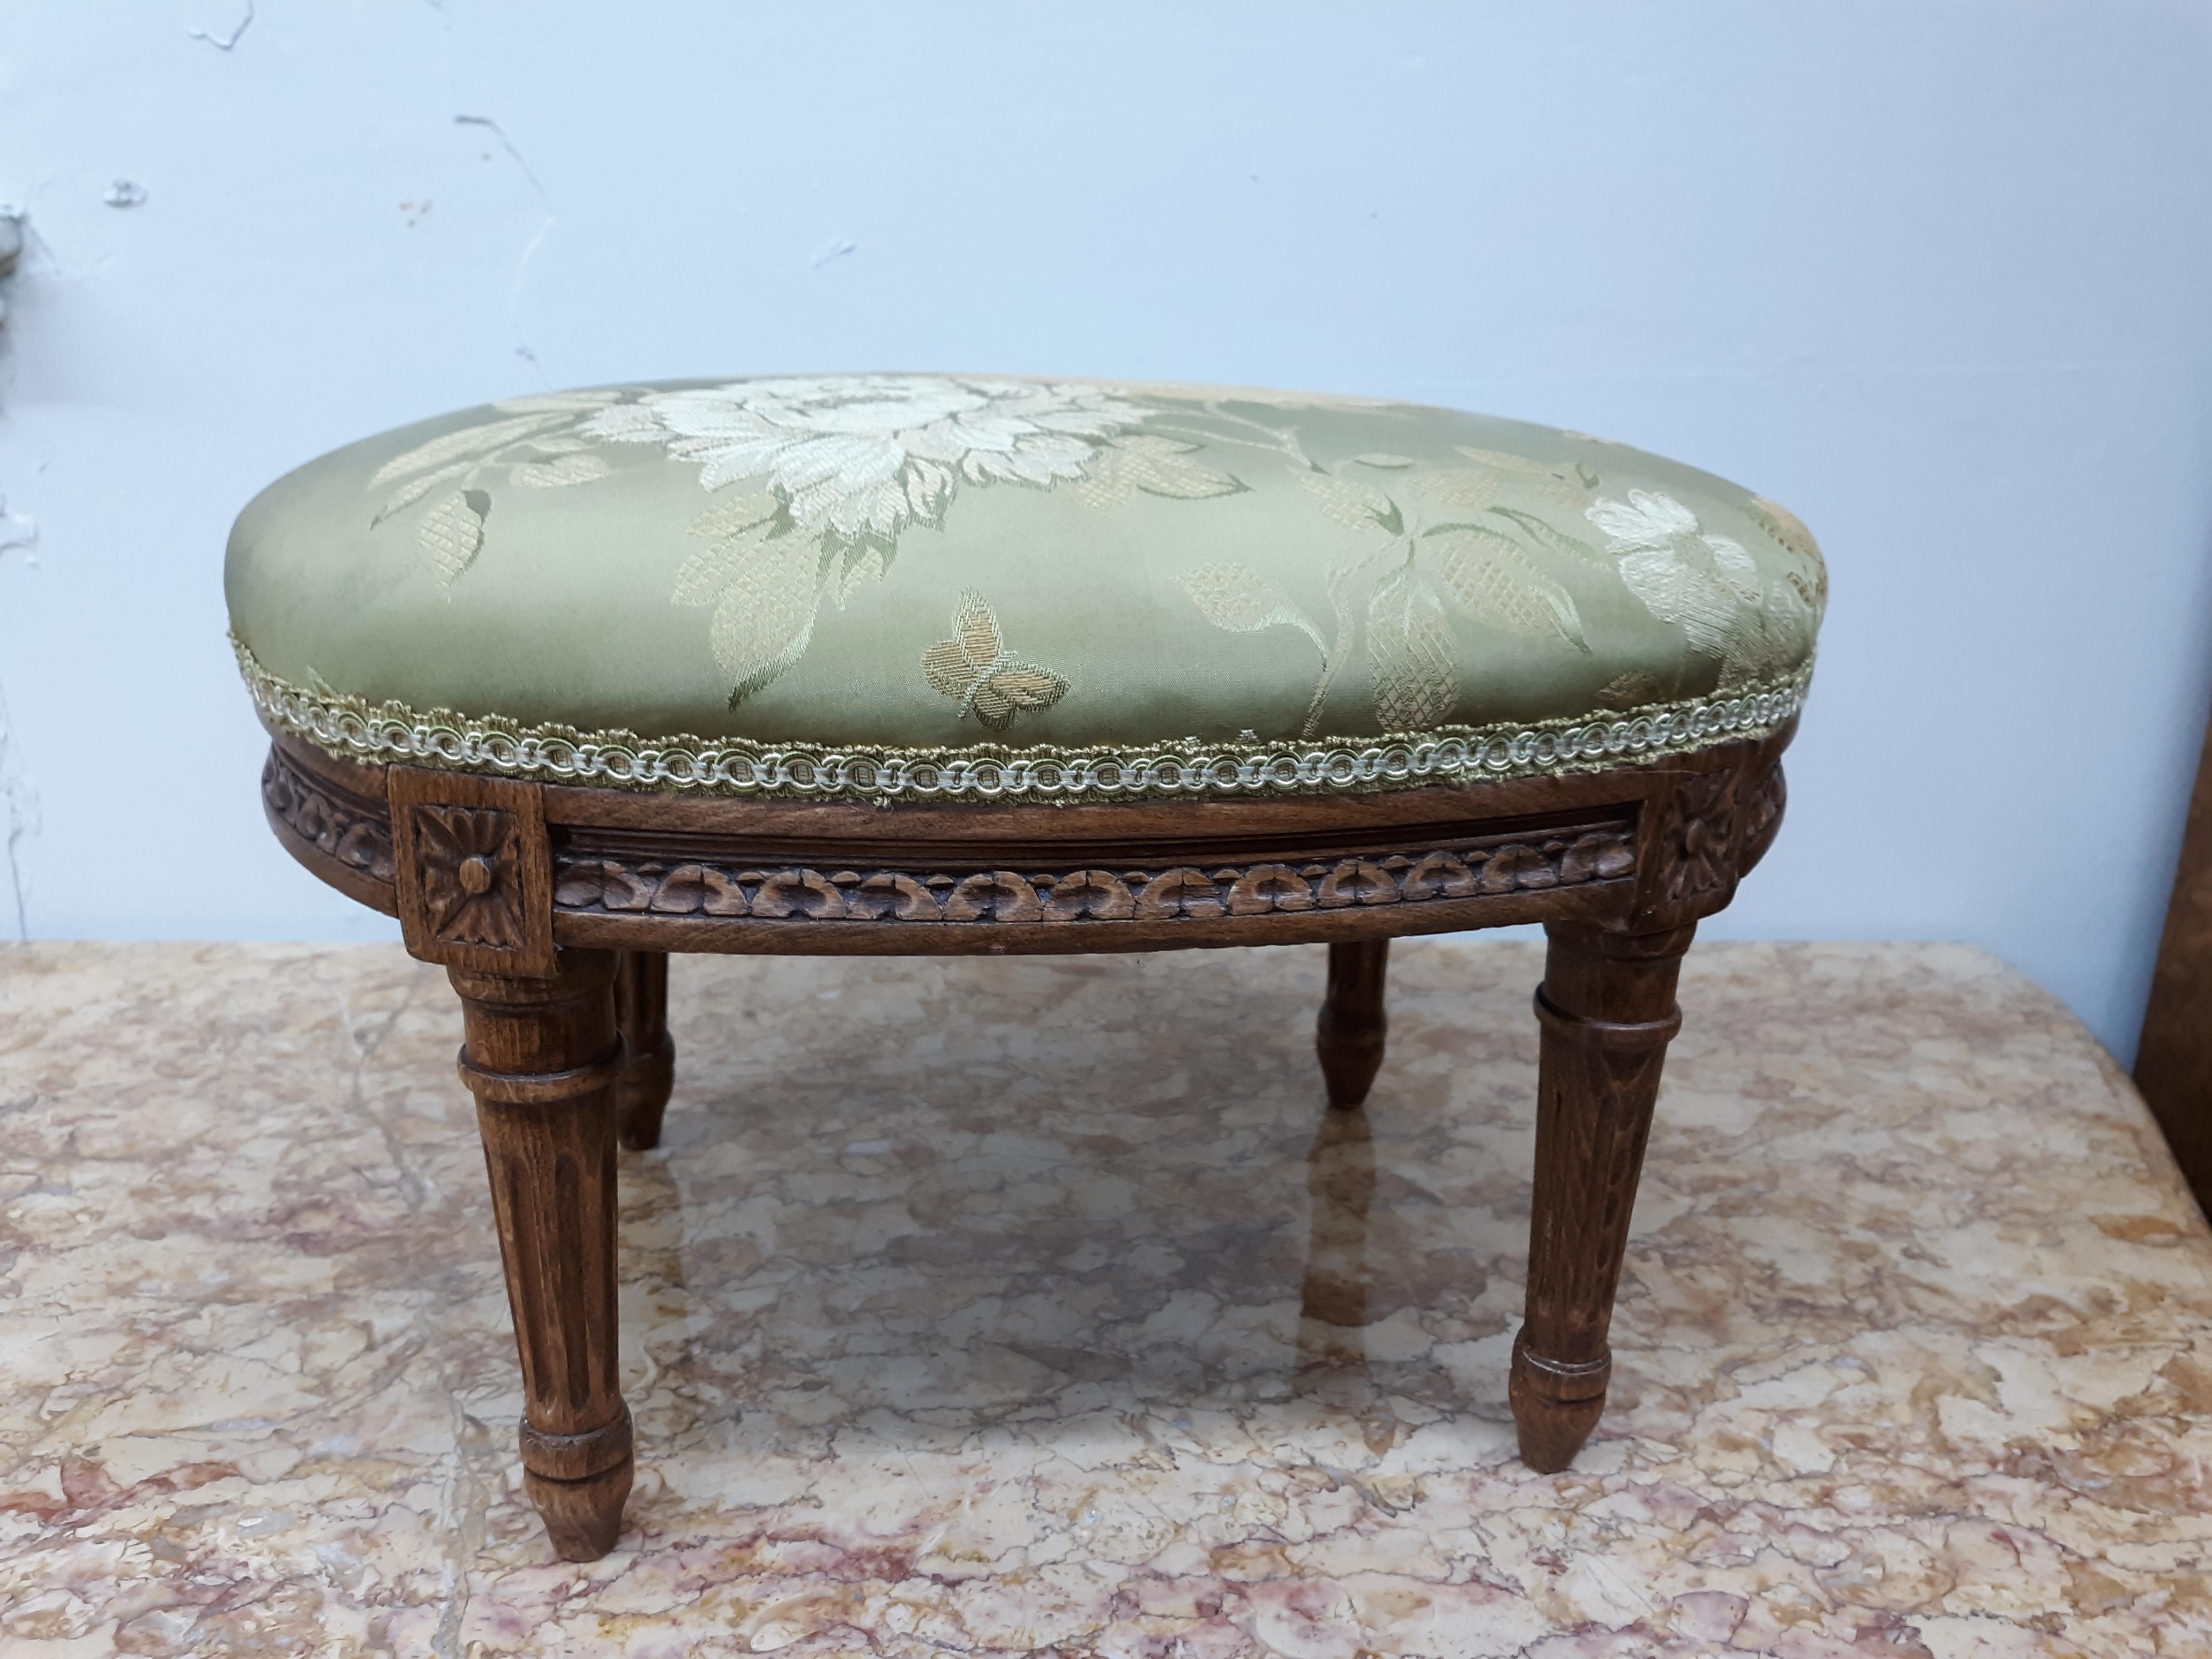 French Louis the 16th style guiltwood salon suite, mid 19th century. Each piece with rectangular back of beaded and guilloche frame with centered foliate crest, two down swept arms with acanthus leaf carved handrests; to swelled aprons. All with